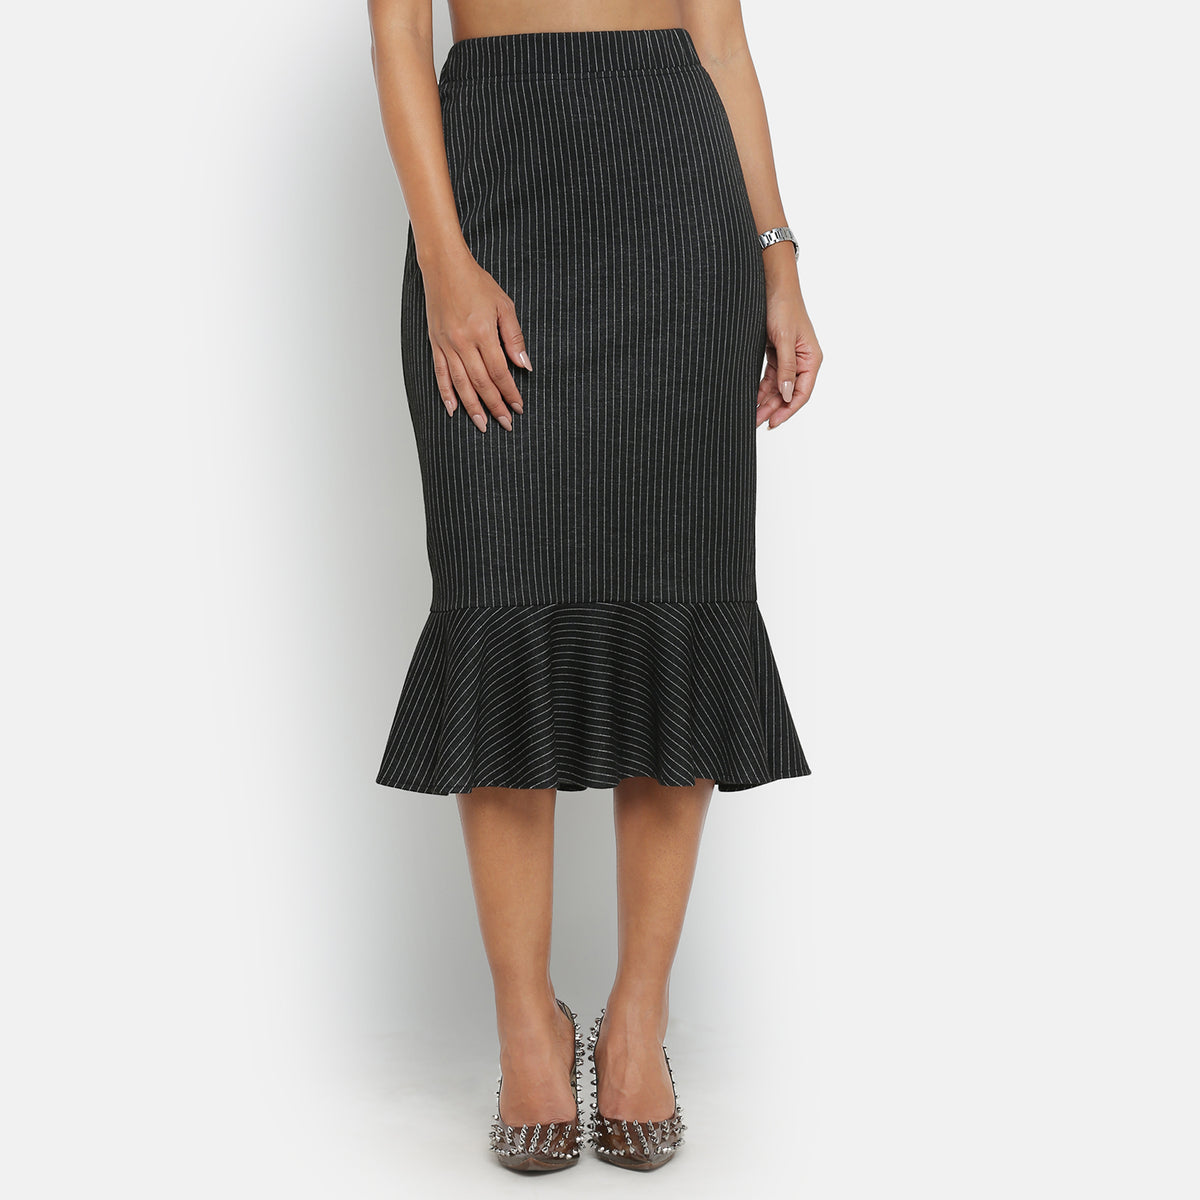 Black and White line skirt with frill